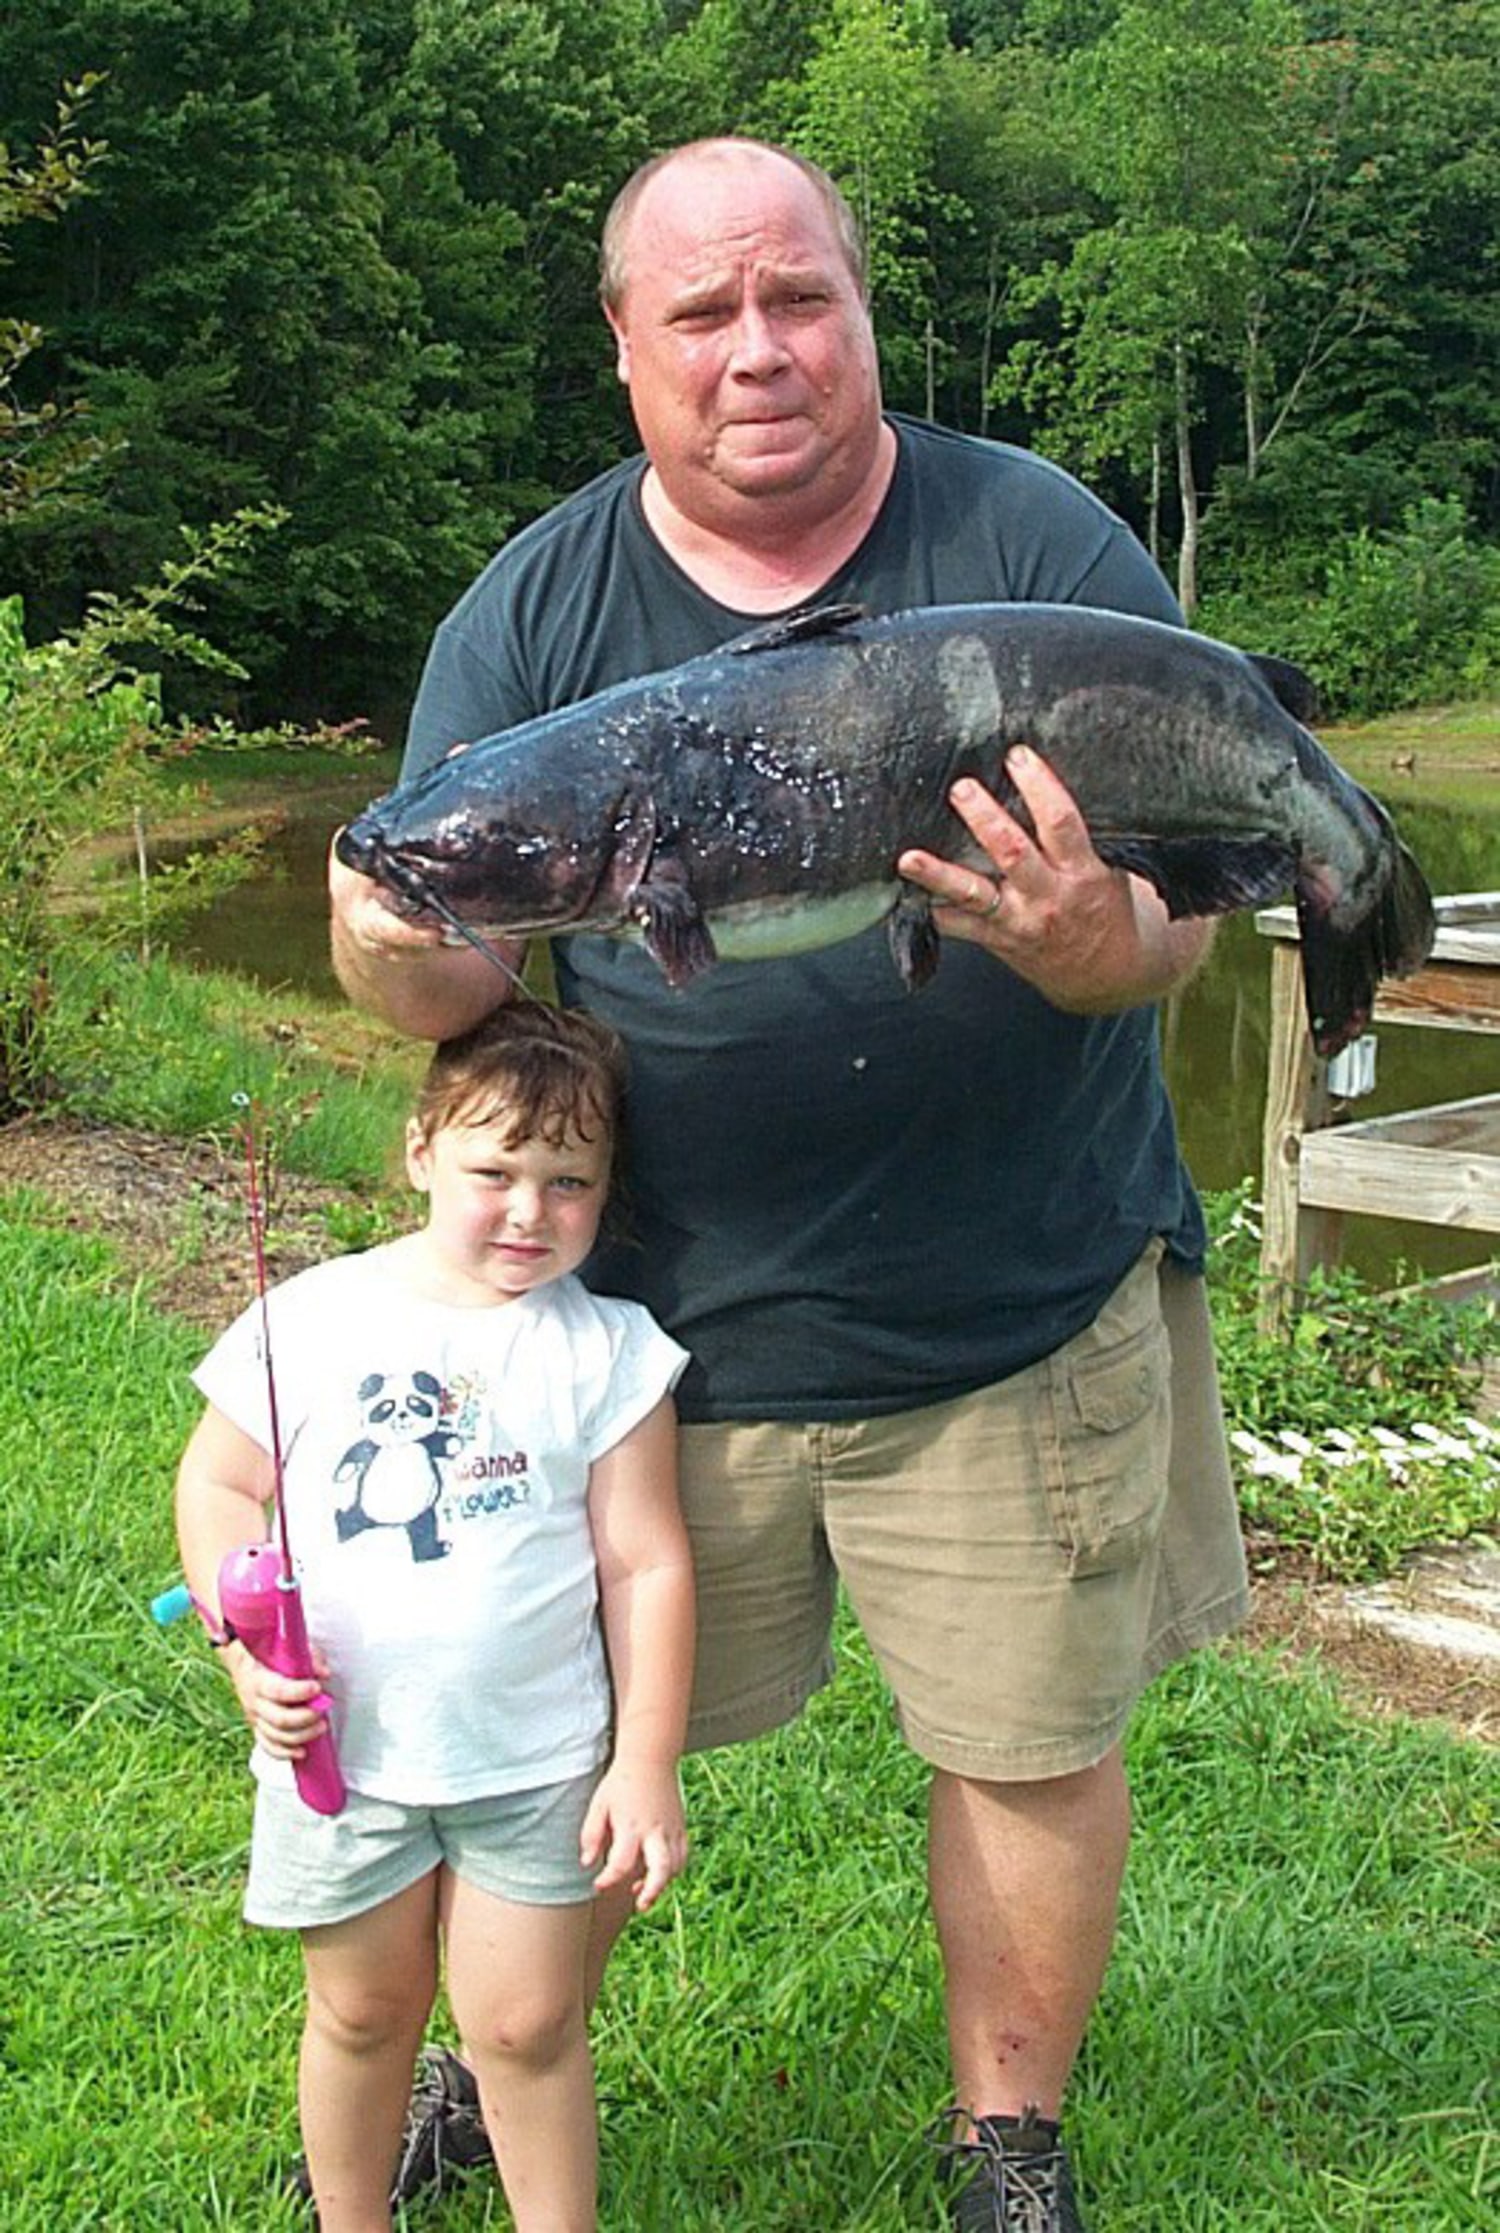 The Nooz: Record fish caught with Barbie rod